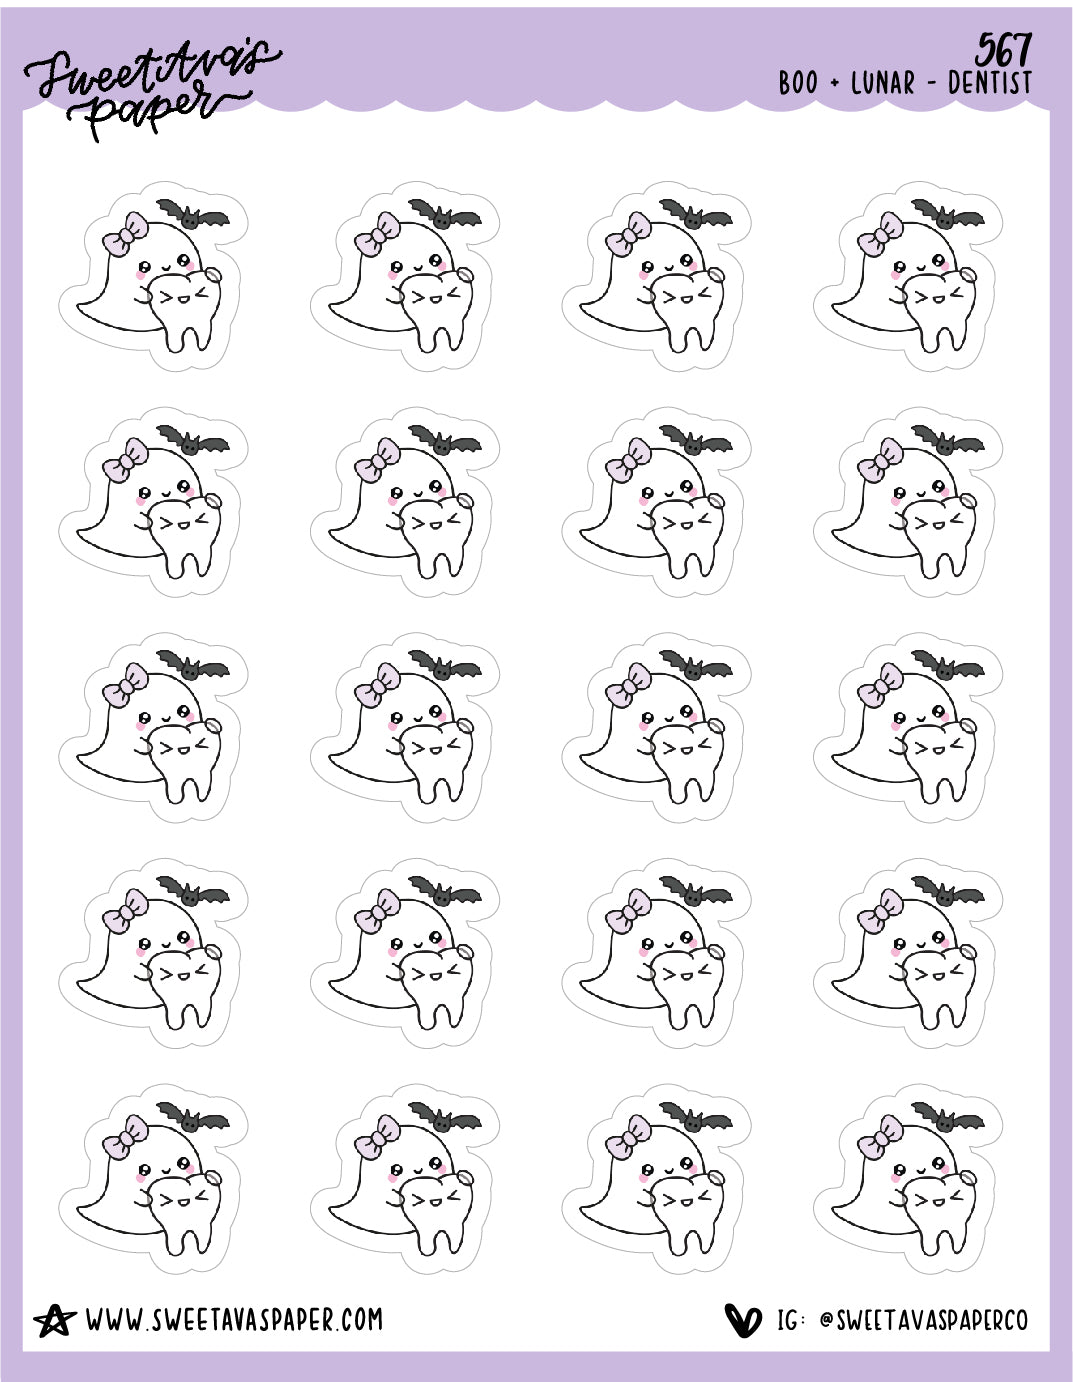 Dentist Planner Stickers - Boo and Lunar [567]